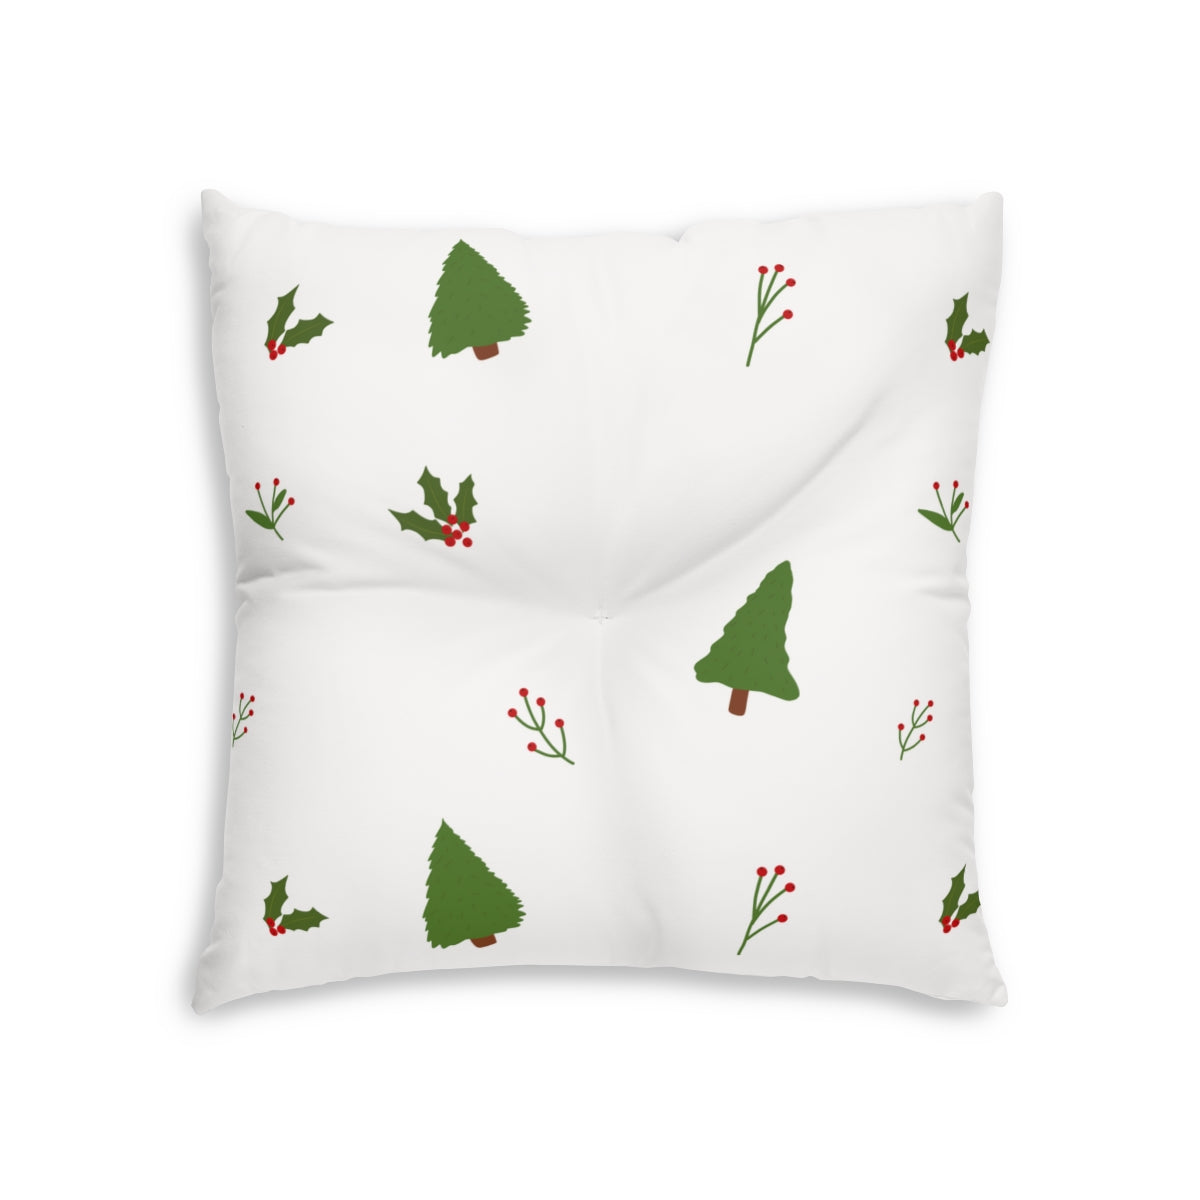 Lifestyle Details - White Square Tufted Holiday Floor Pillow - Evergreen Trees & Holly - 26x26 - Front View